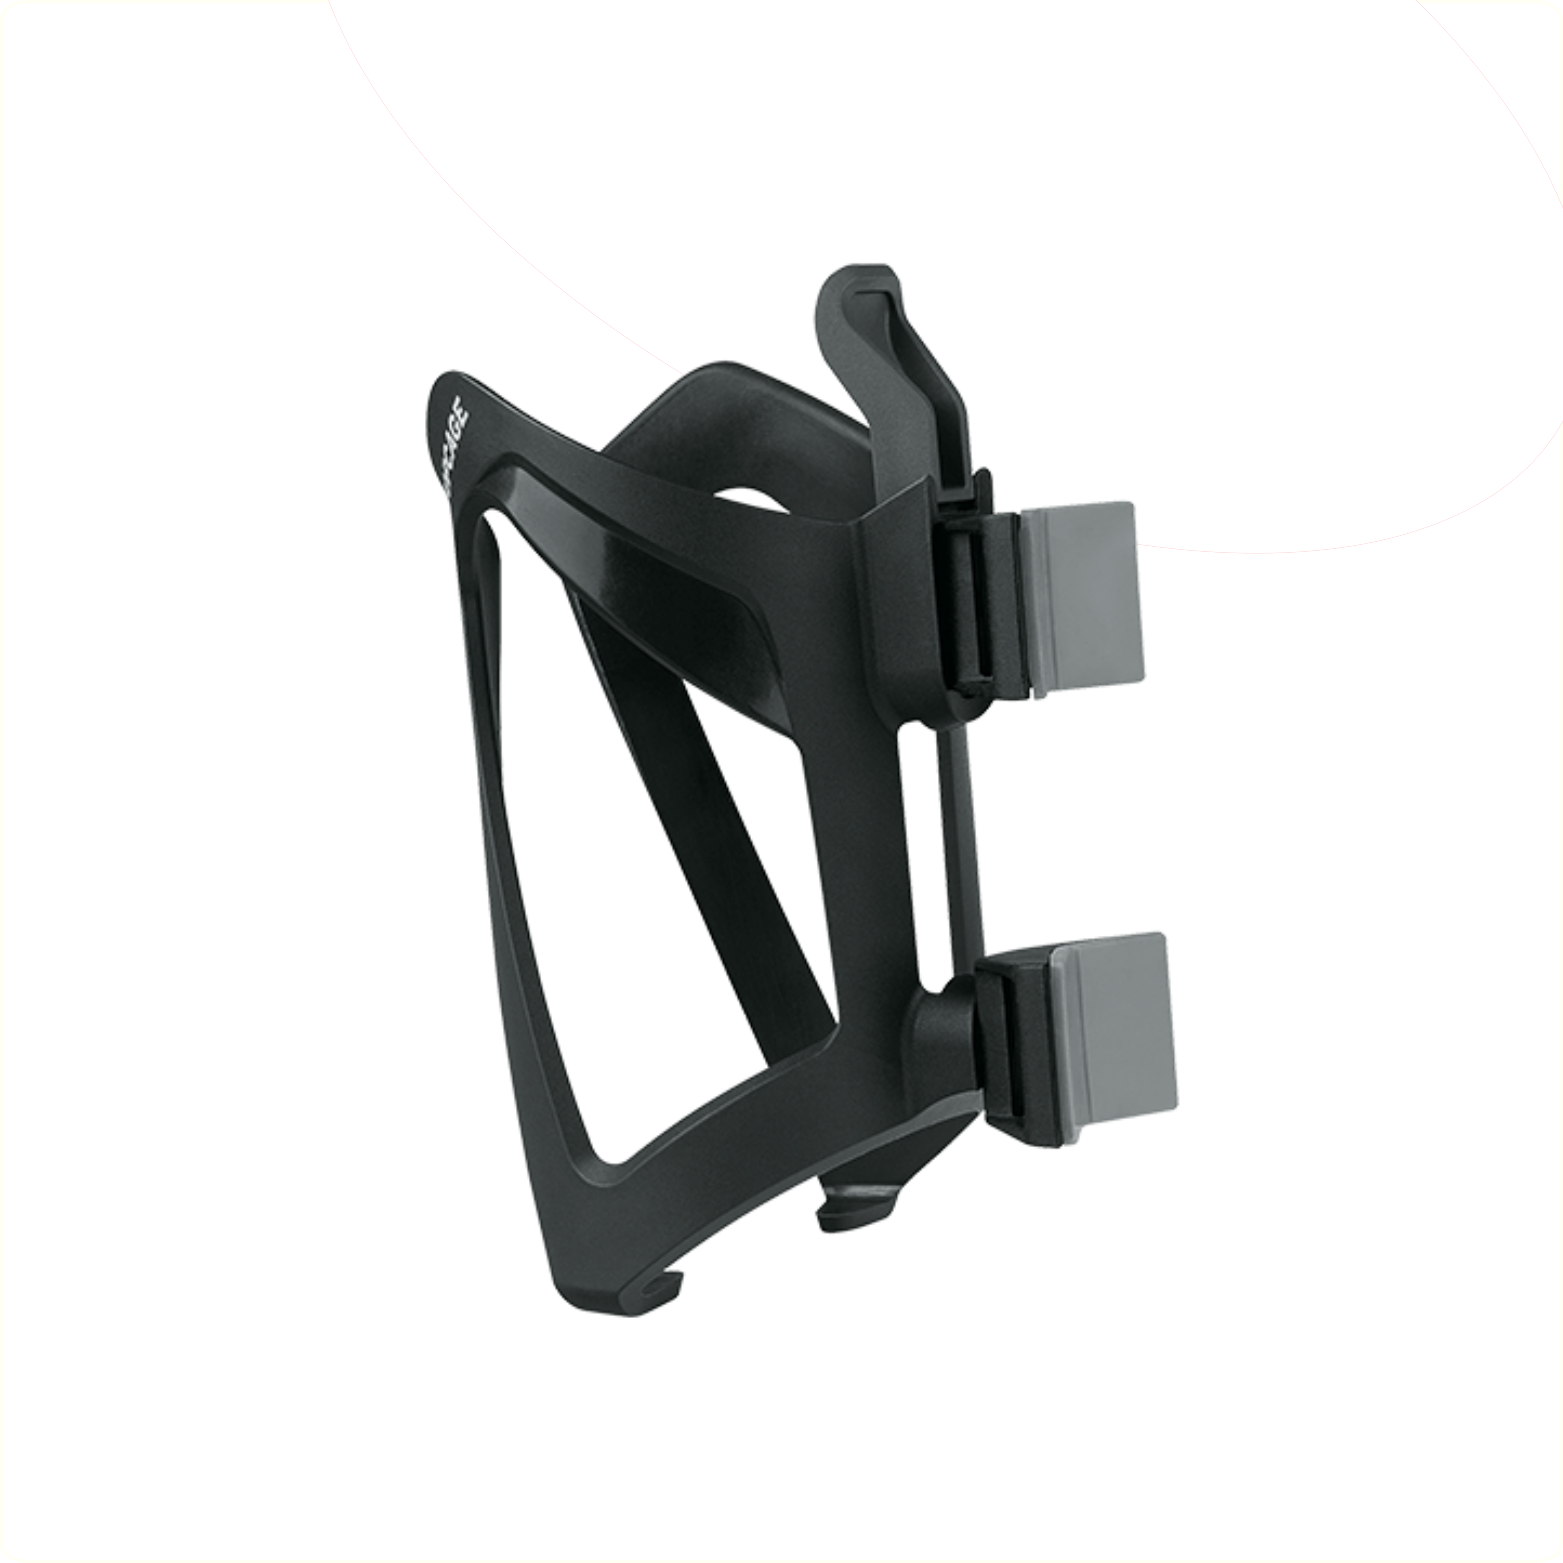 SKS Bottle cage and SKS Bottle attachment "Anywhere" with topcage, matt black